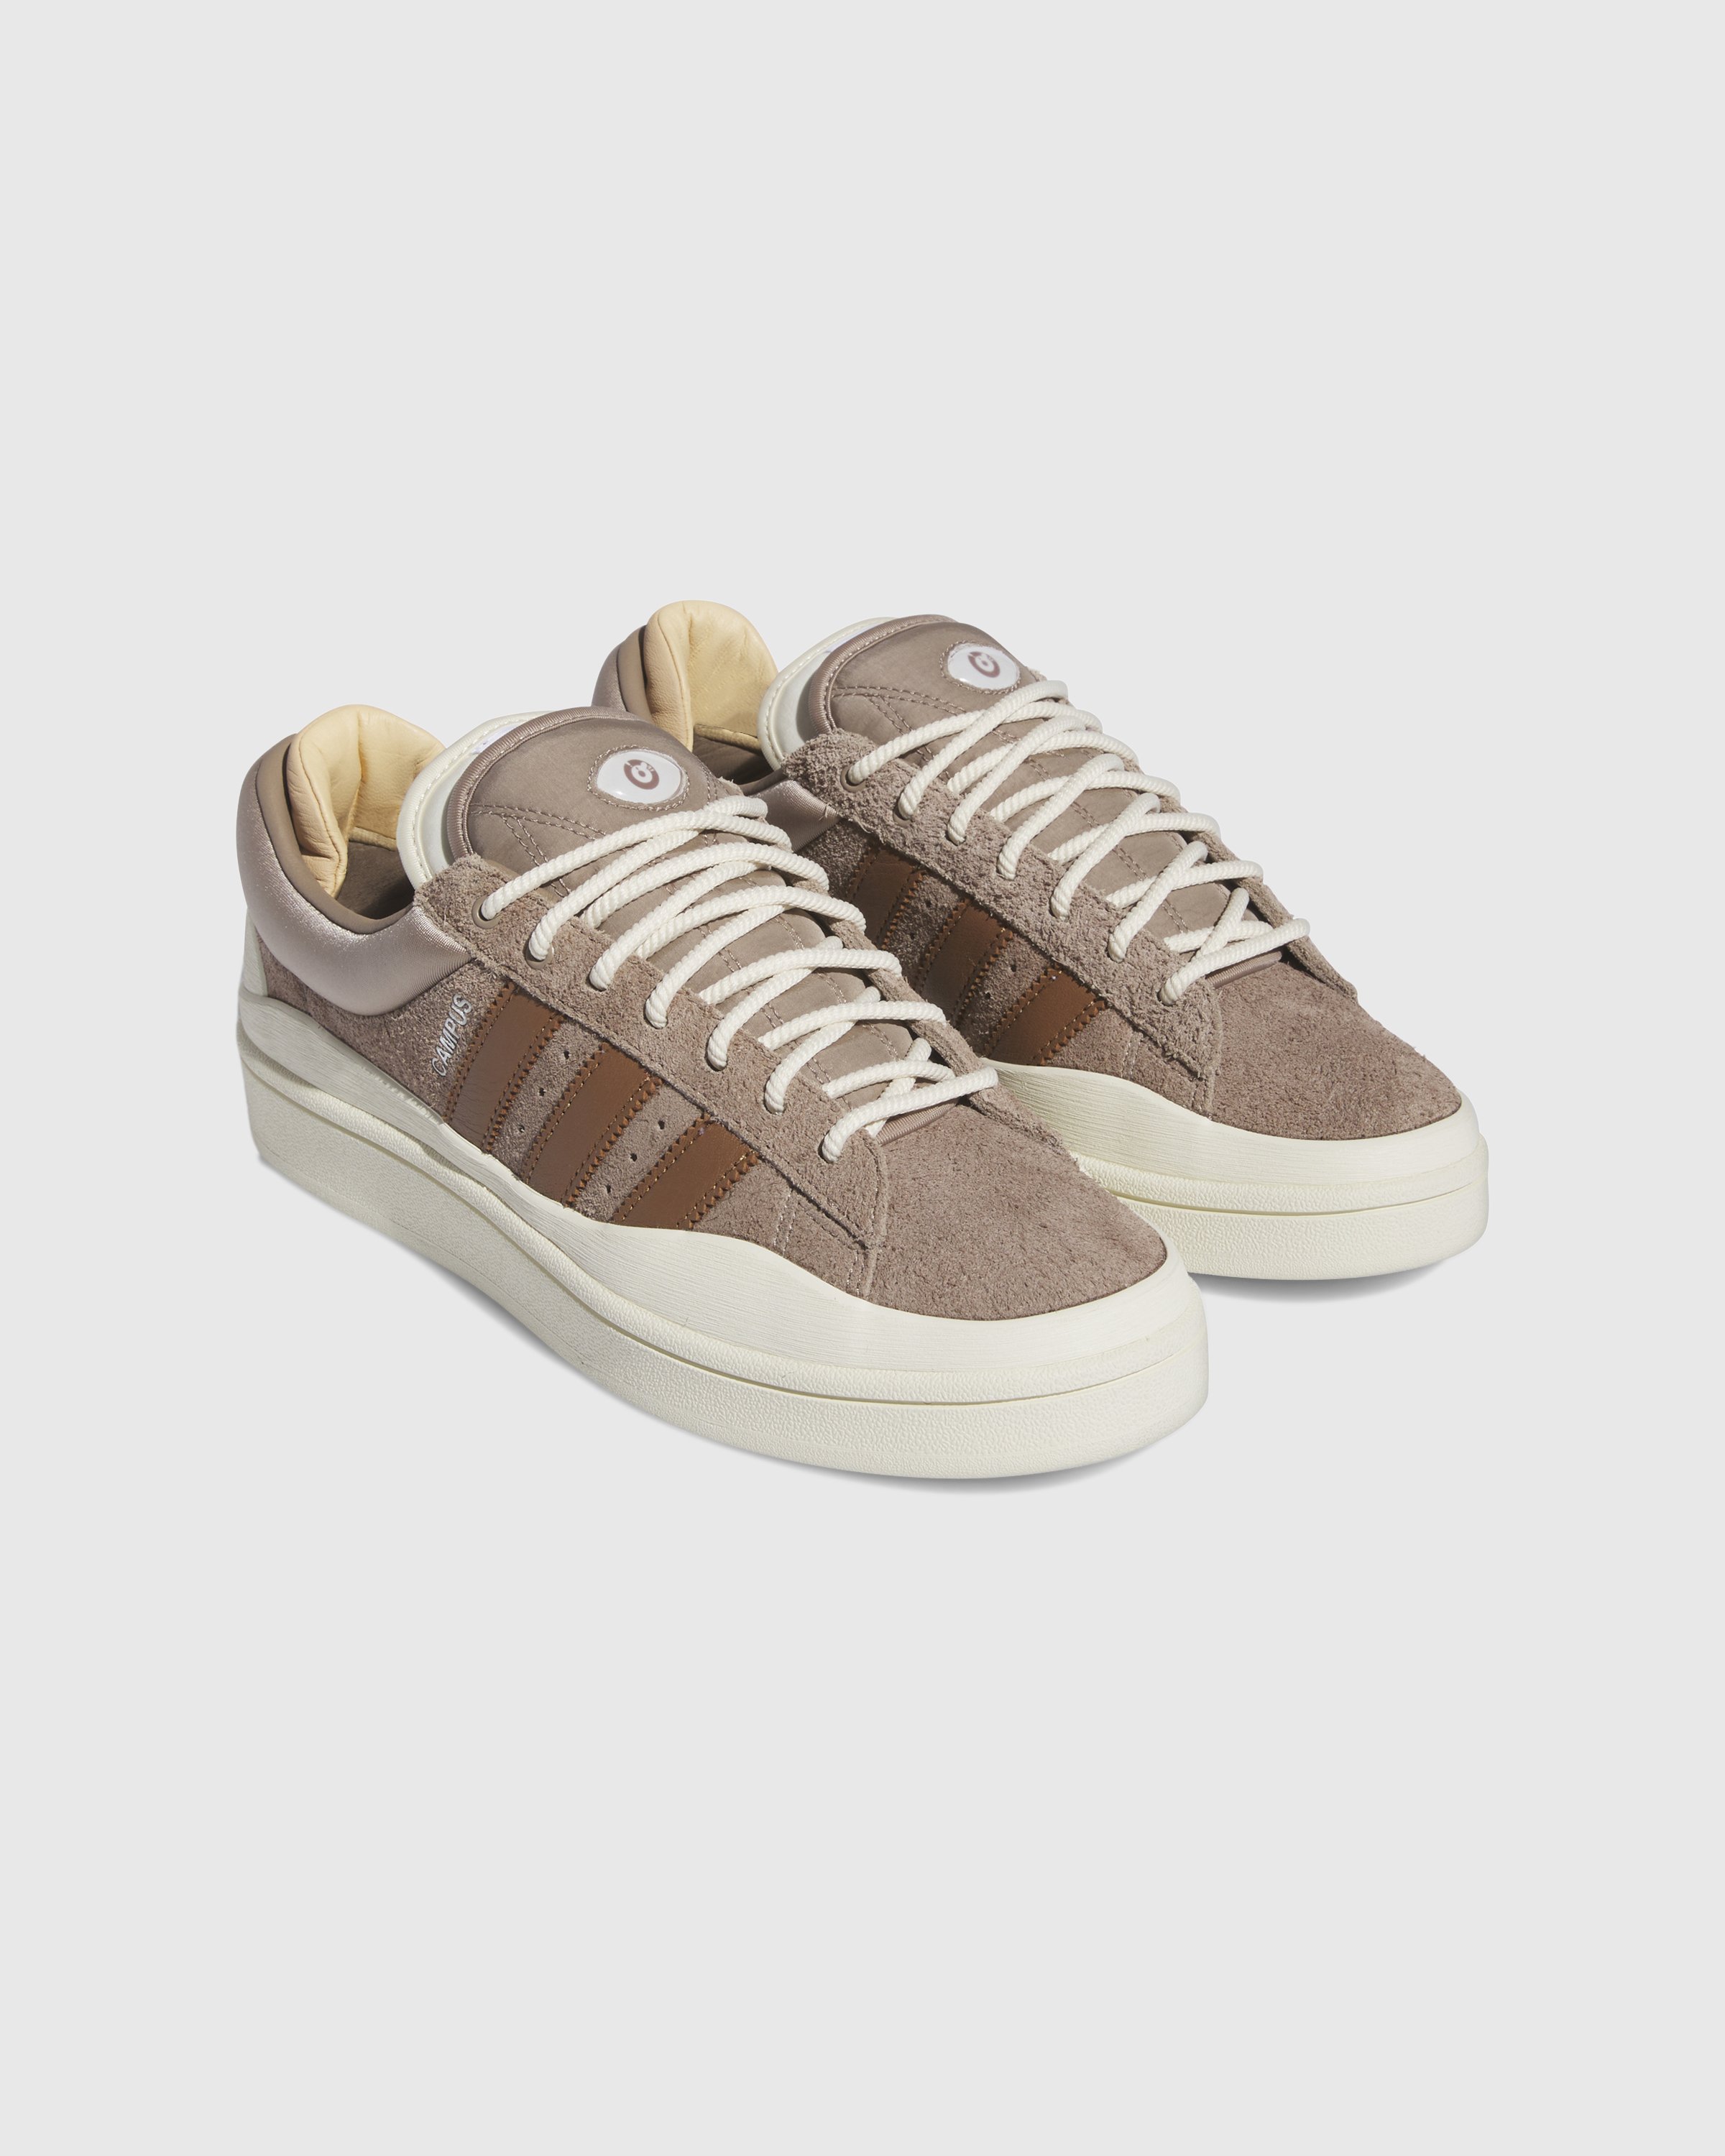 Adidas x Bad Bunny - Campus Chalky Brown - Footwear - White - Image 3